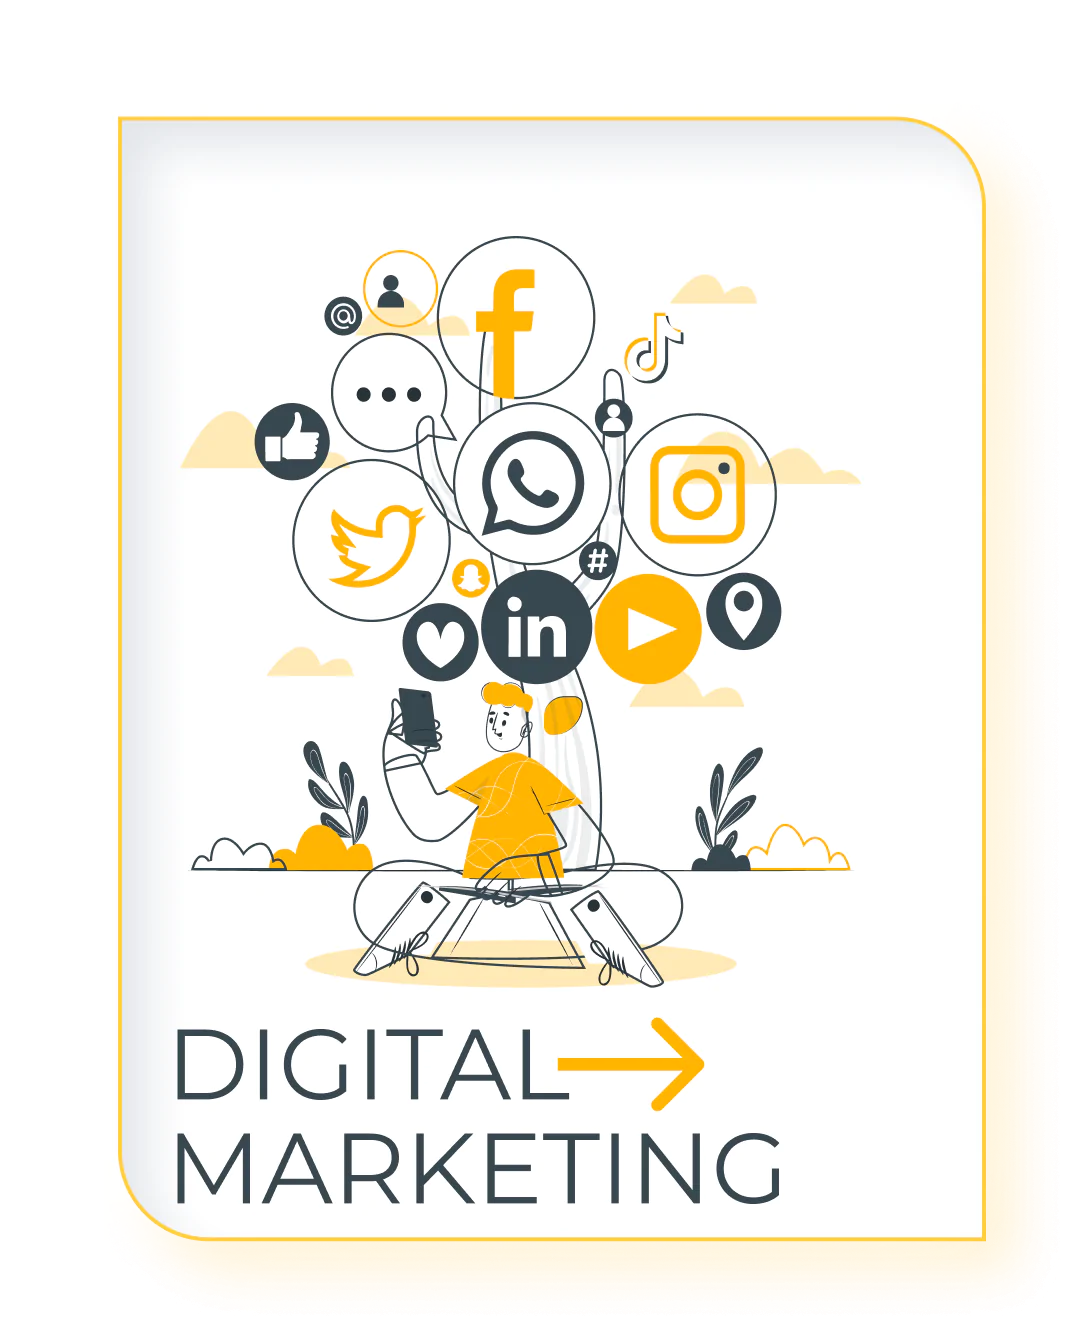 In today's digital age, a strong online presence is essential for success. Our digital marketing experts employ a comprehensive range of strategies to enhance your visibility, attract traffic, and generate leads. From SEO and PPC to social media marketing and content creation, we have the tools and knowledge to help you achieve your goals.